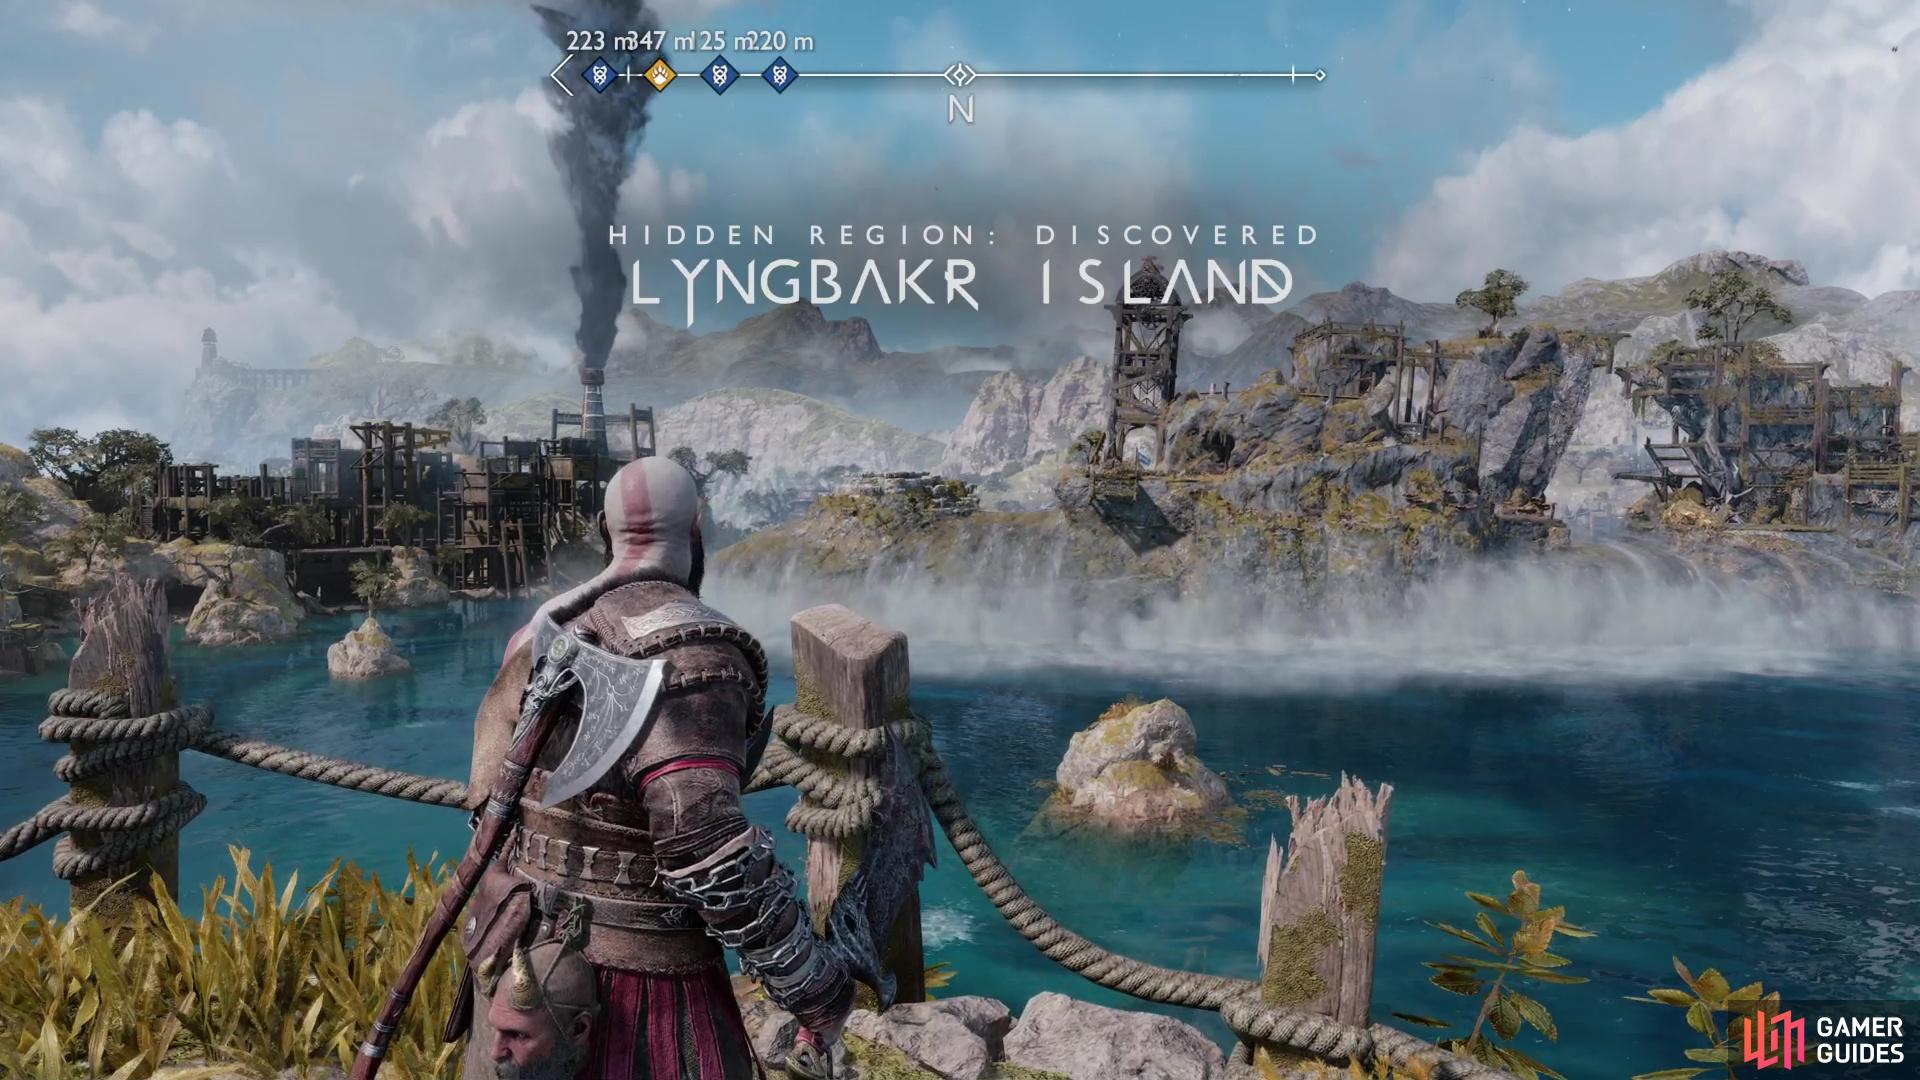 Fetch the Watchtower Key and sound a drum to summon the Lyngbakr - and with it, Lyngbakr Island - from the depths.